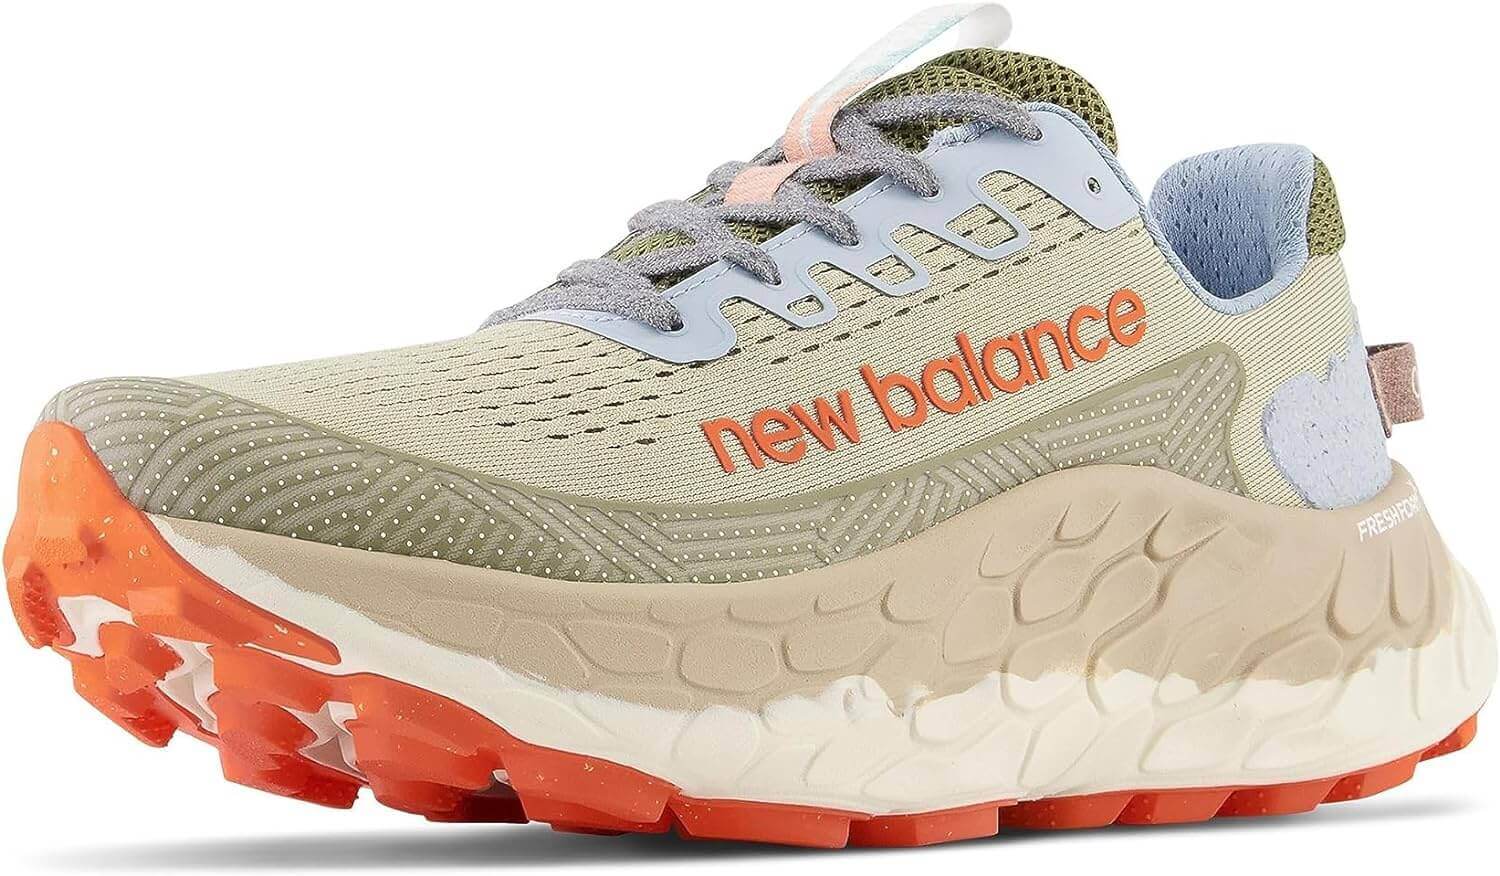 Shop The Latest >Men's Fresh Foam X Trail More V3 Running Shoe > *Only $215.93*> From The Top Brand > *New Balancel* > Shop Now and Get Free Shipping On Orders Over $45.00 >*Shop Earth Foot*